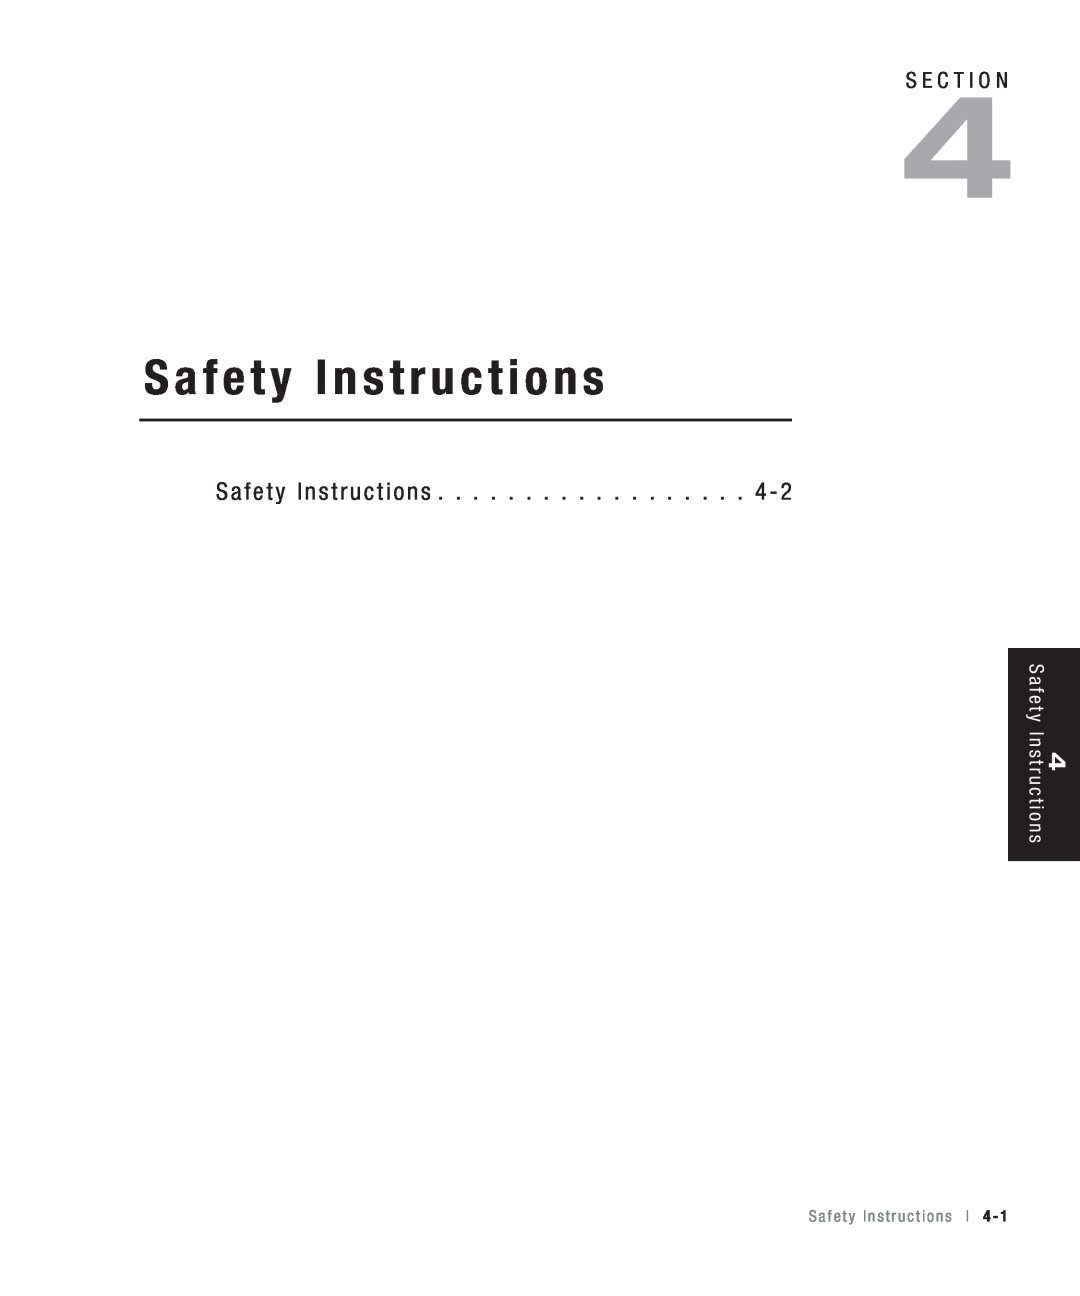 Conair CHS-810 manual Safety Instructions, S a f e t y I n s t r u c t i o n s l 4 